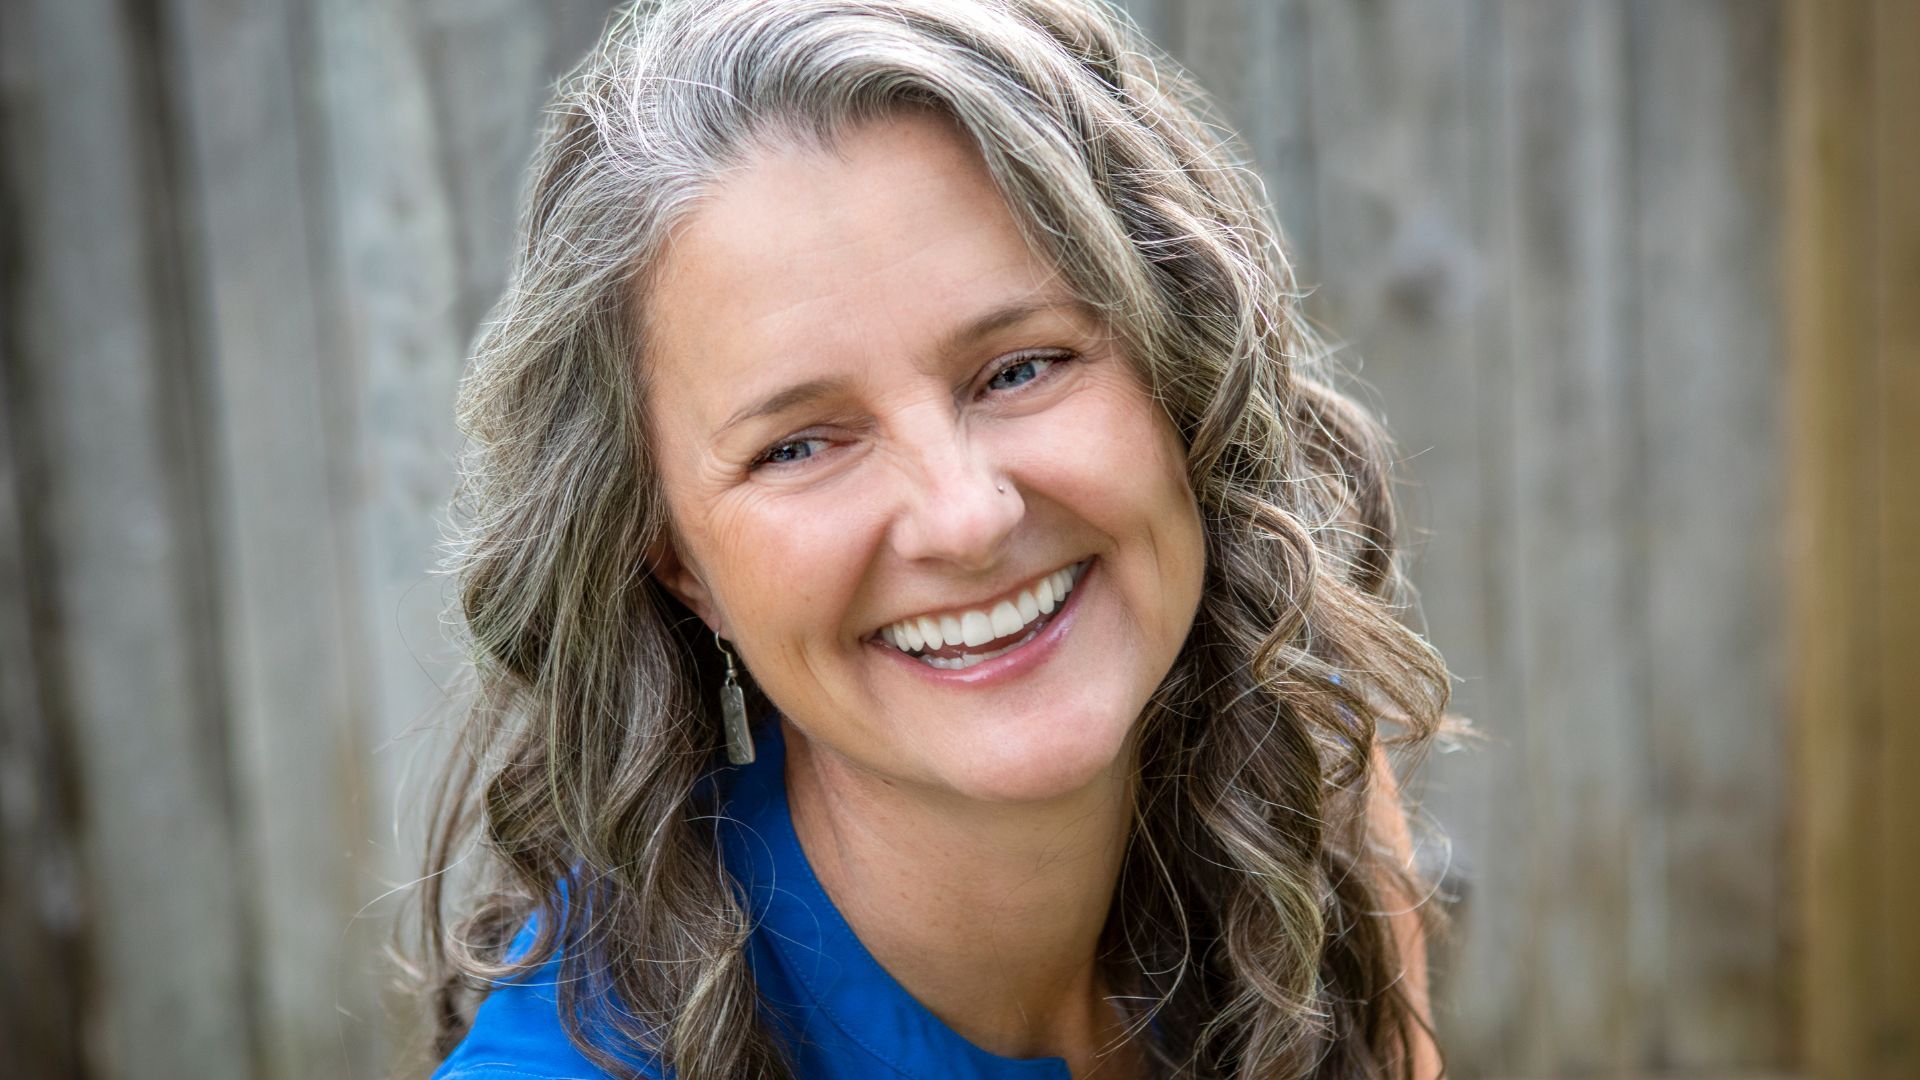 A woman with gray hair is smiling and wearing a blue shirt.